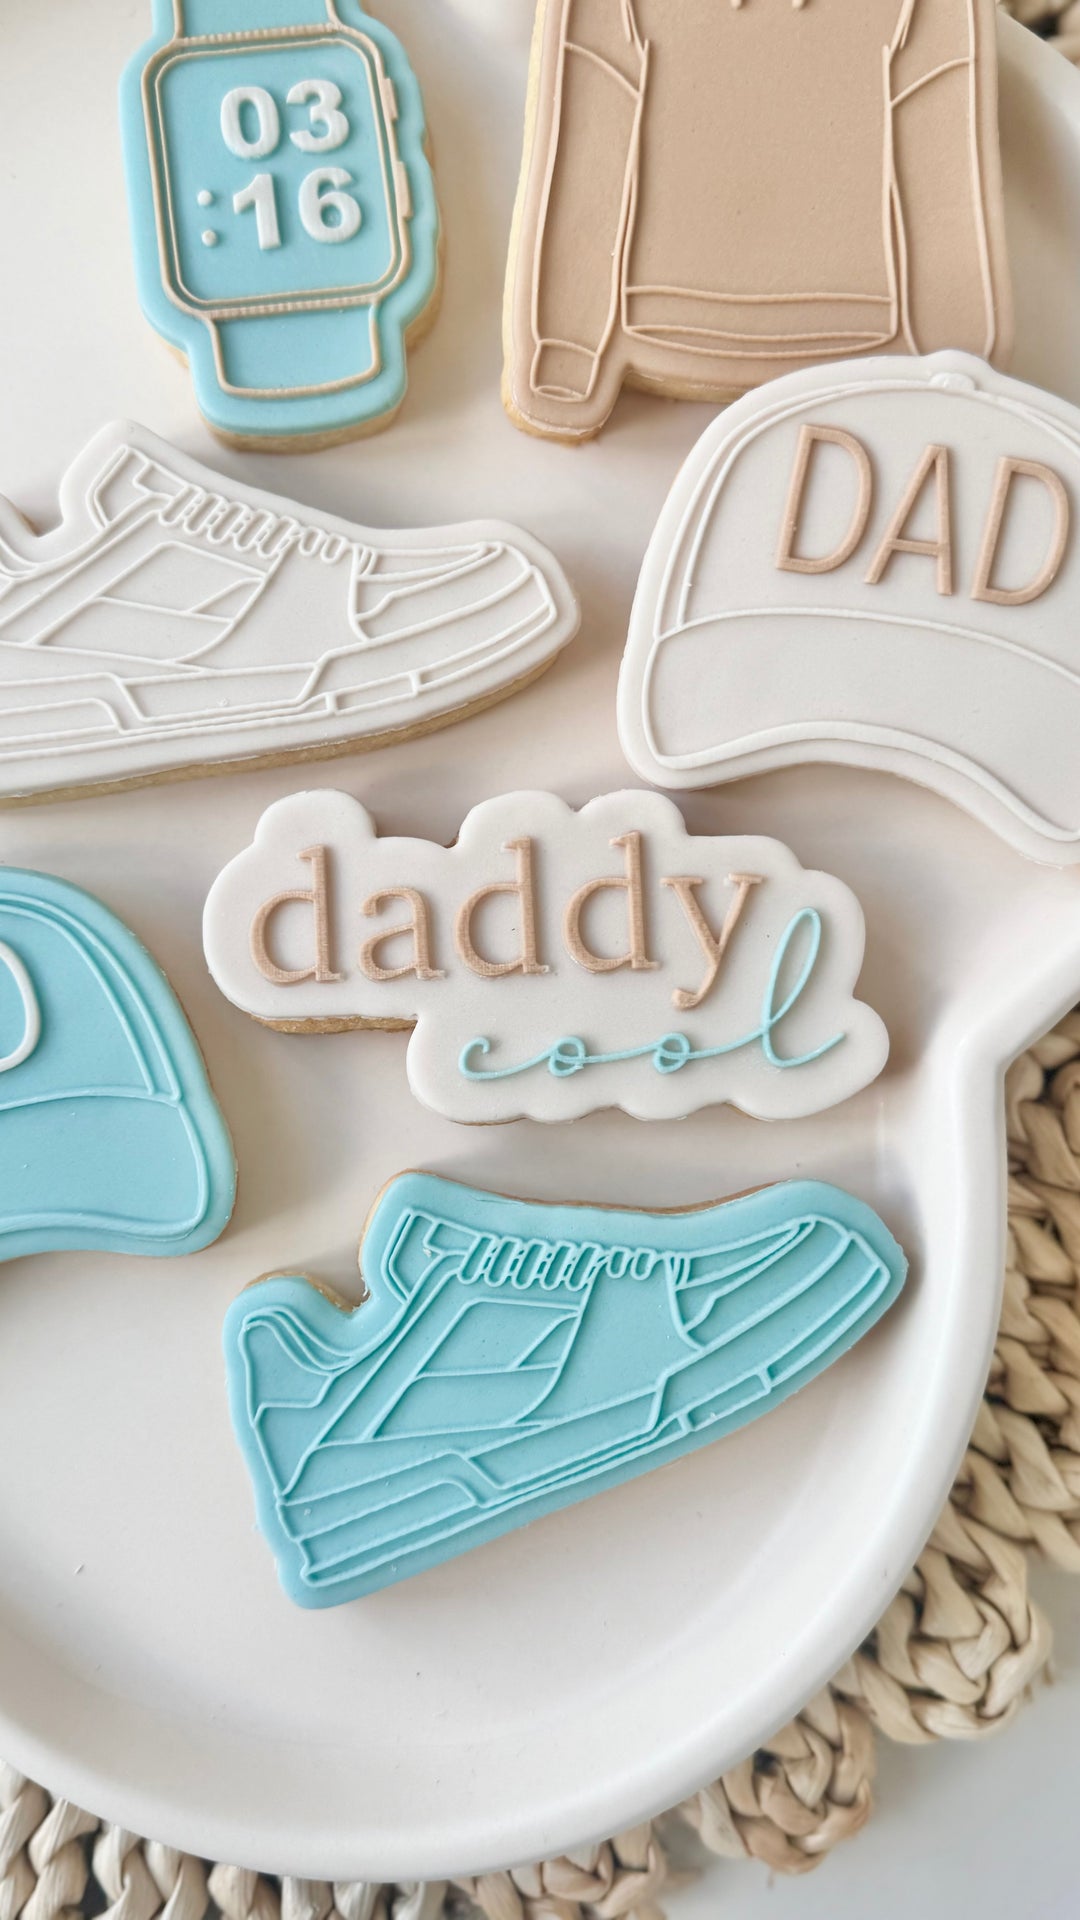 Daddy cool + cookie cutter